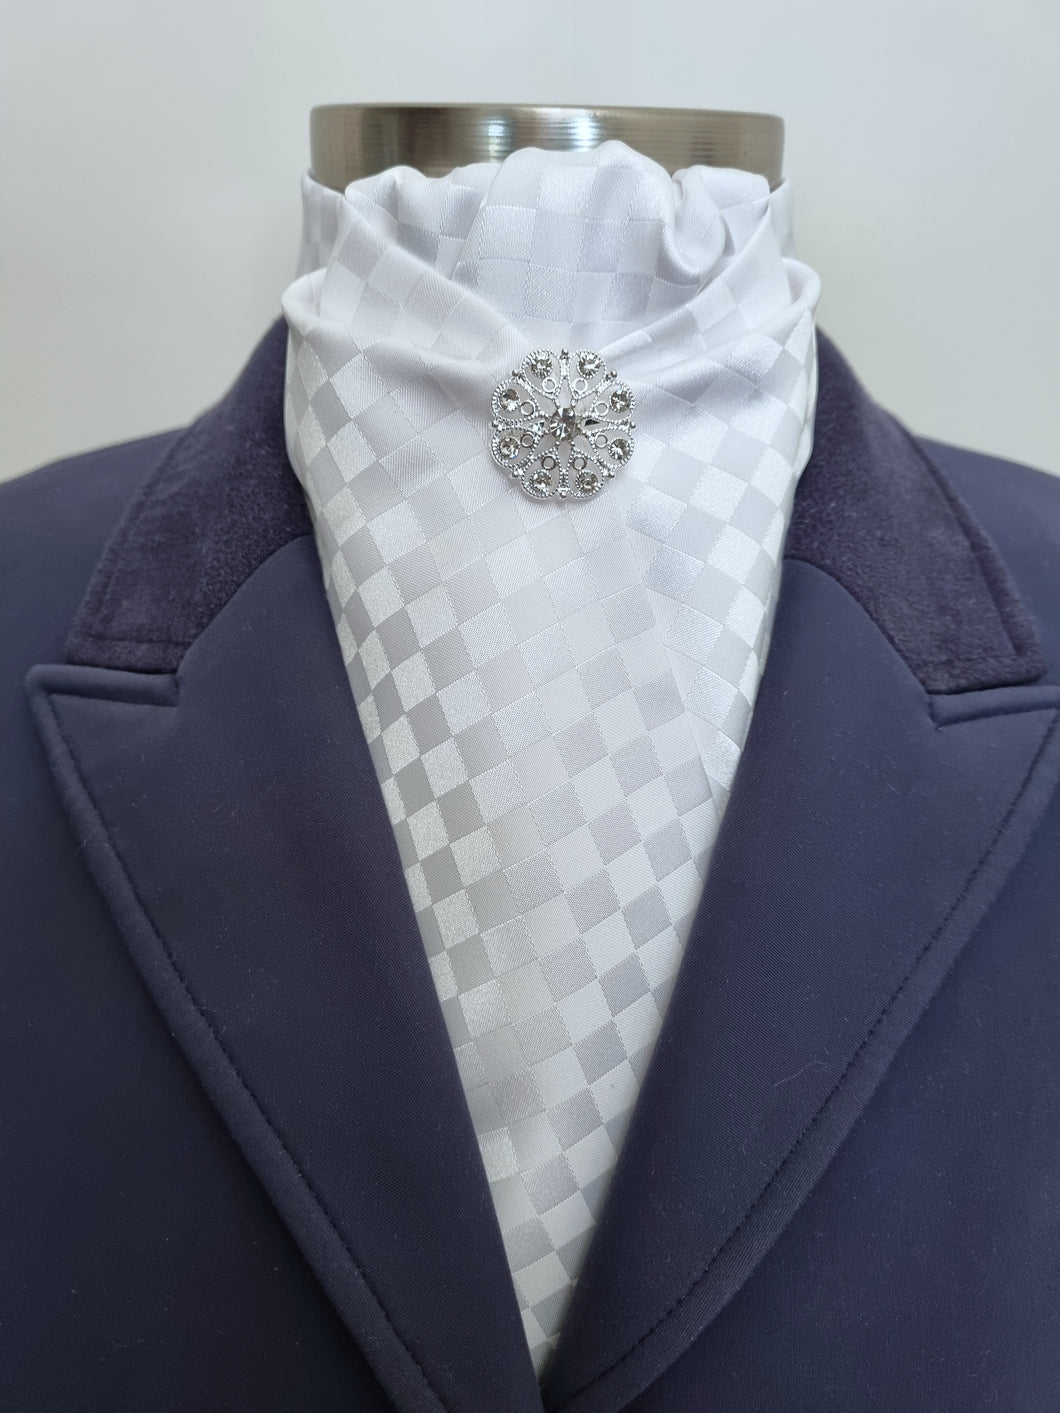 Clearance - ERA DEB STOCK TIE - White Checkerboard satin with brooch